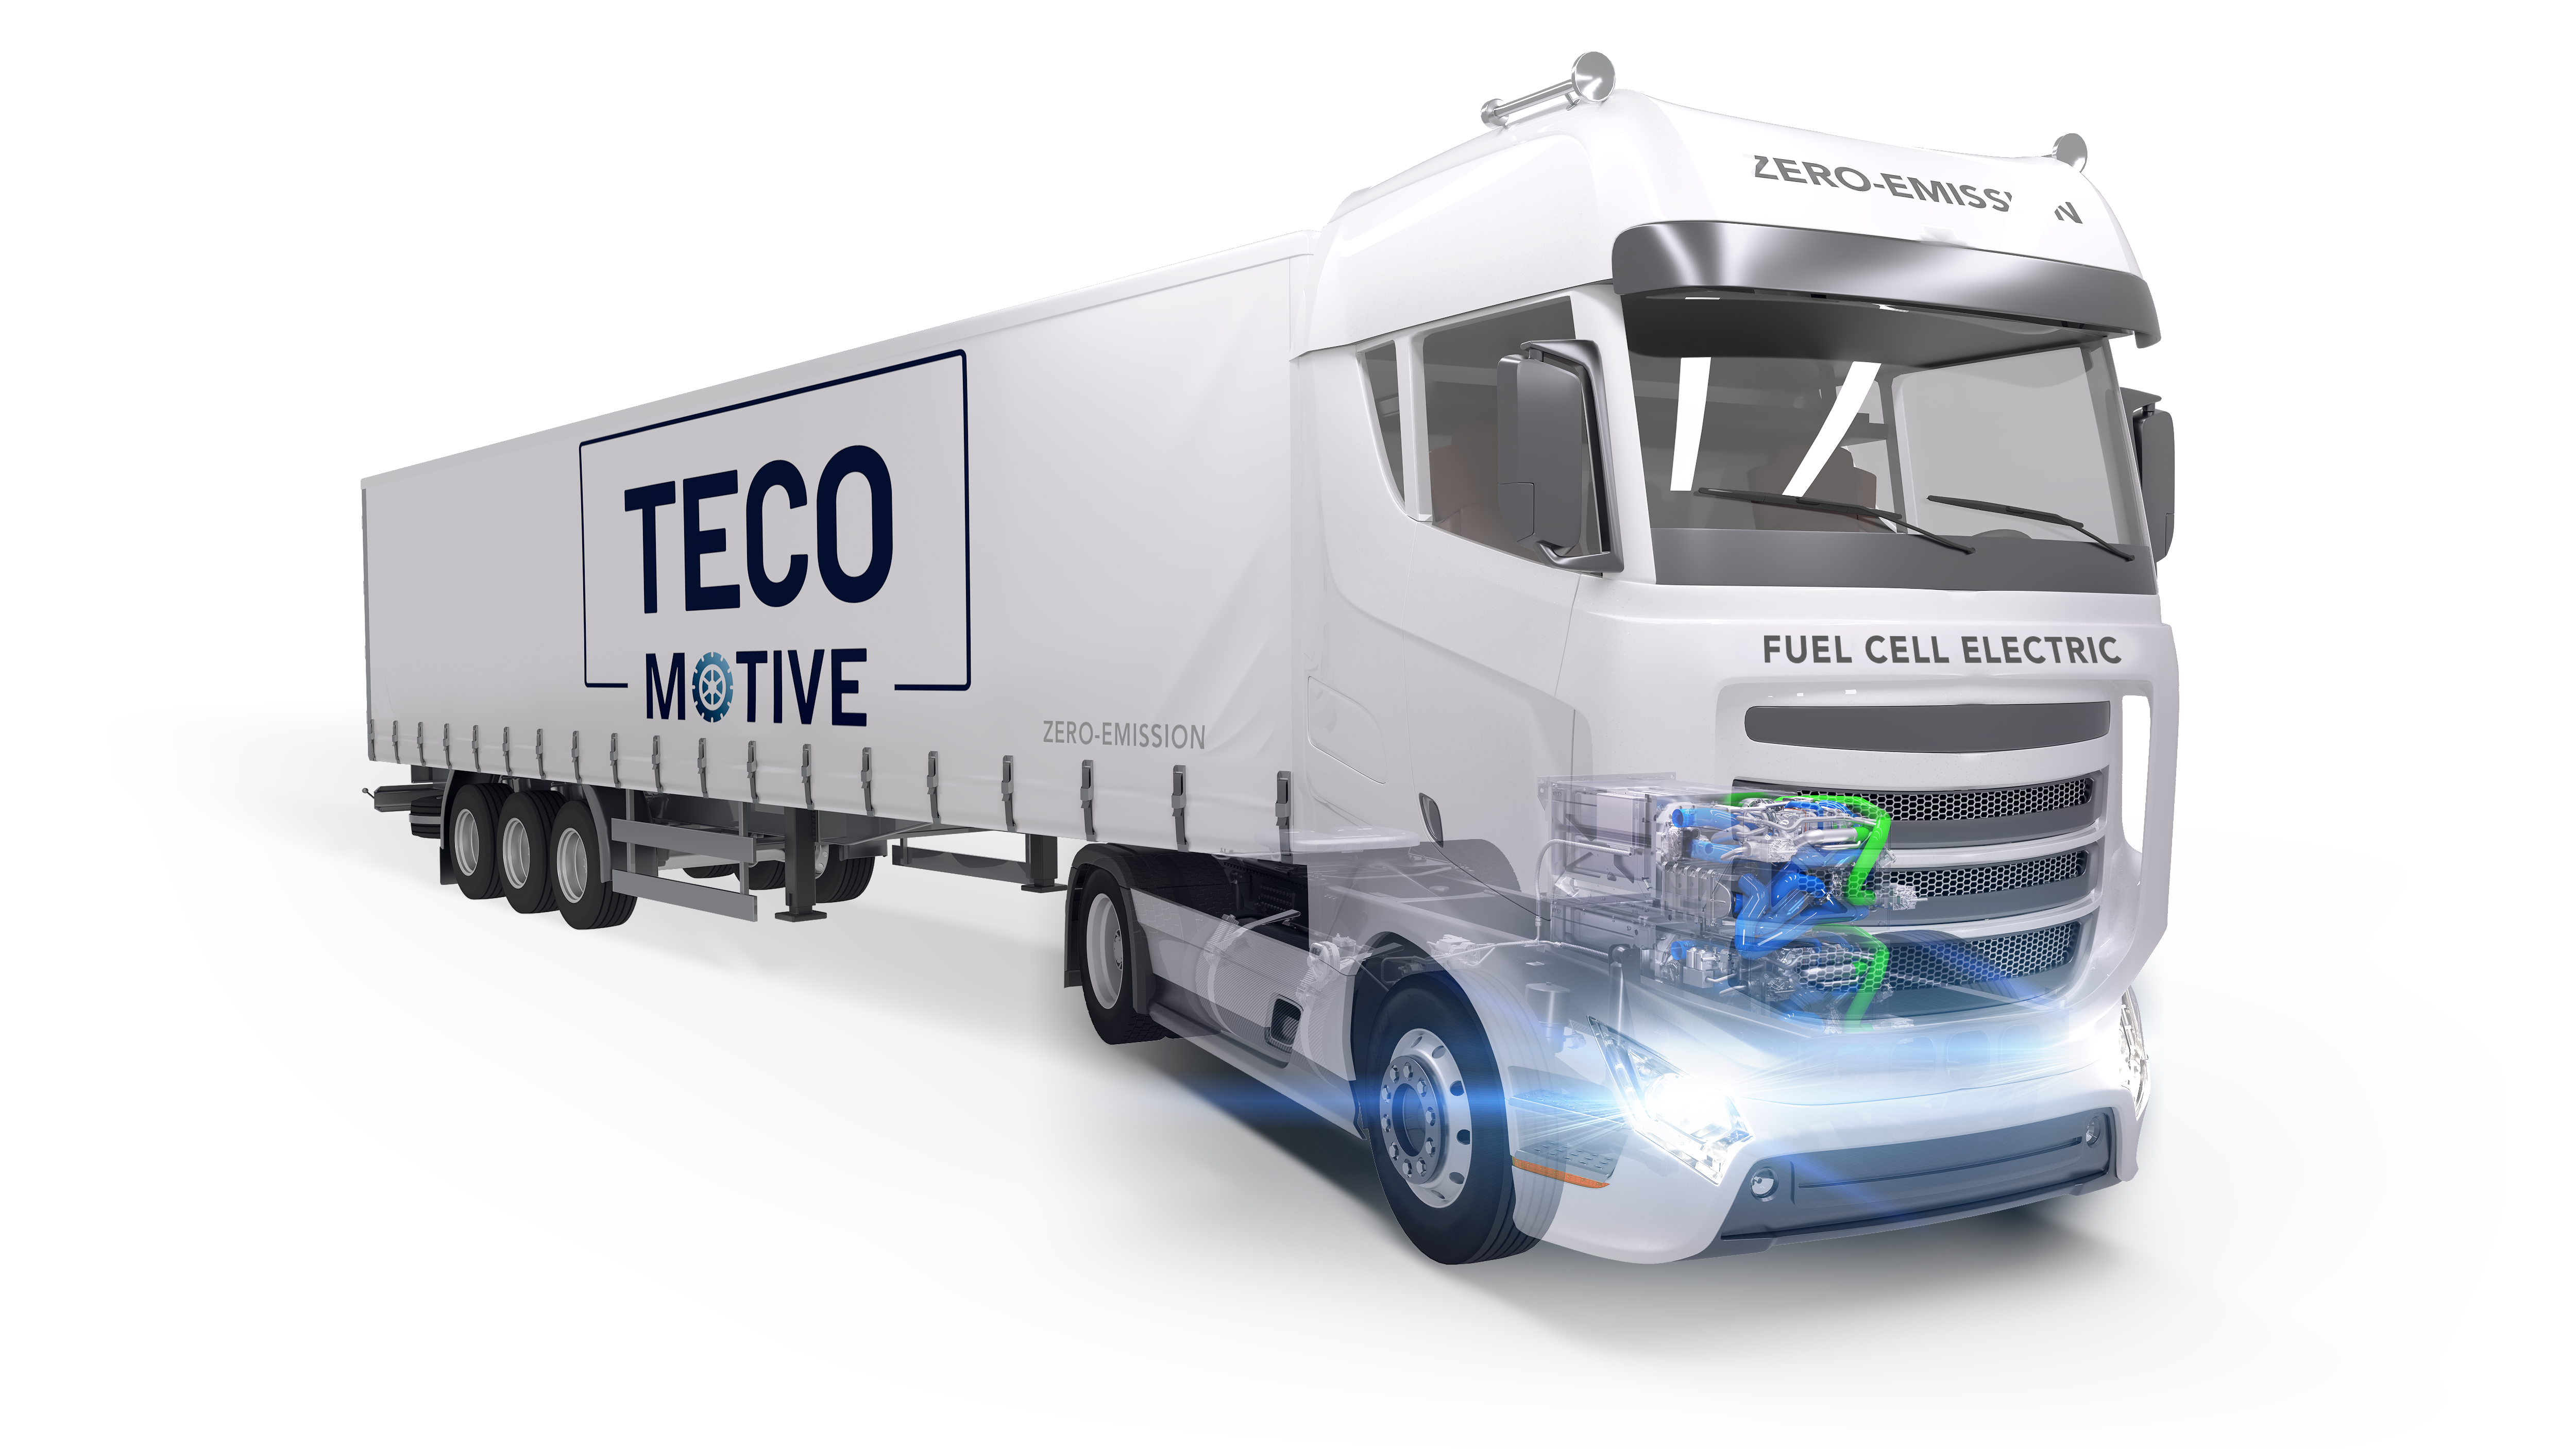 Picture TECO MOTIVE: TECO 2030 may utilize existing supply chain and infrastructure at the Narvik production facility to evaluate the industrialization of a heavy-duty fuel cell truck system for retrofitting the existing truck fleet.